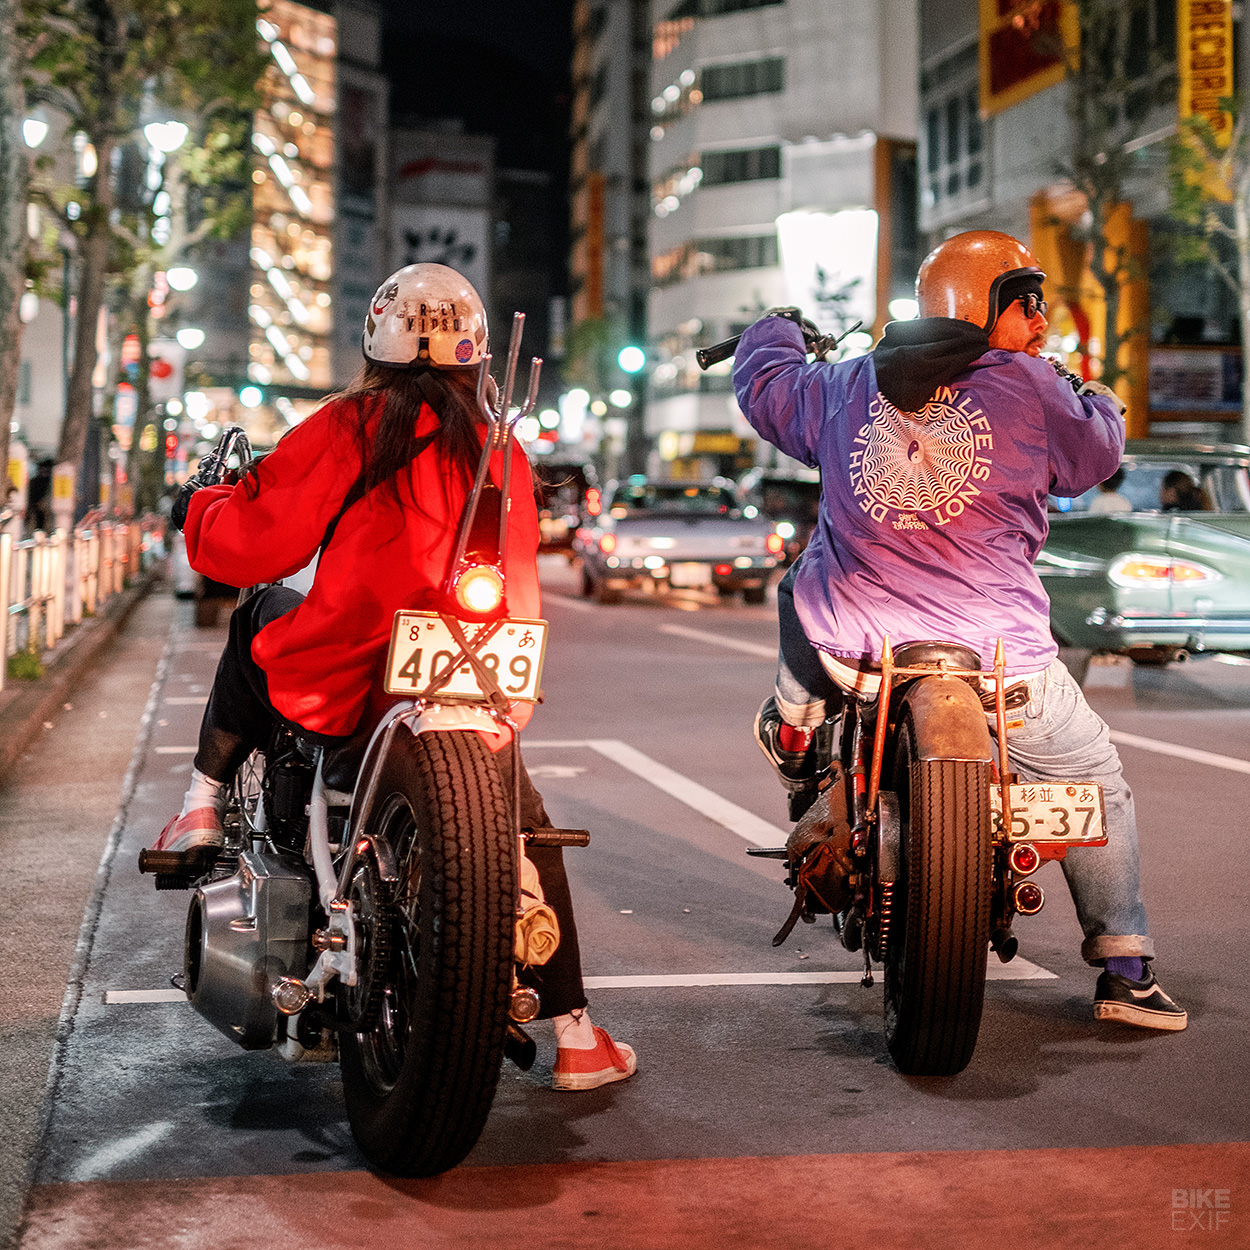 Japanese custom motorcycles and bobbers